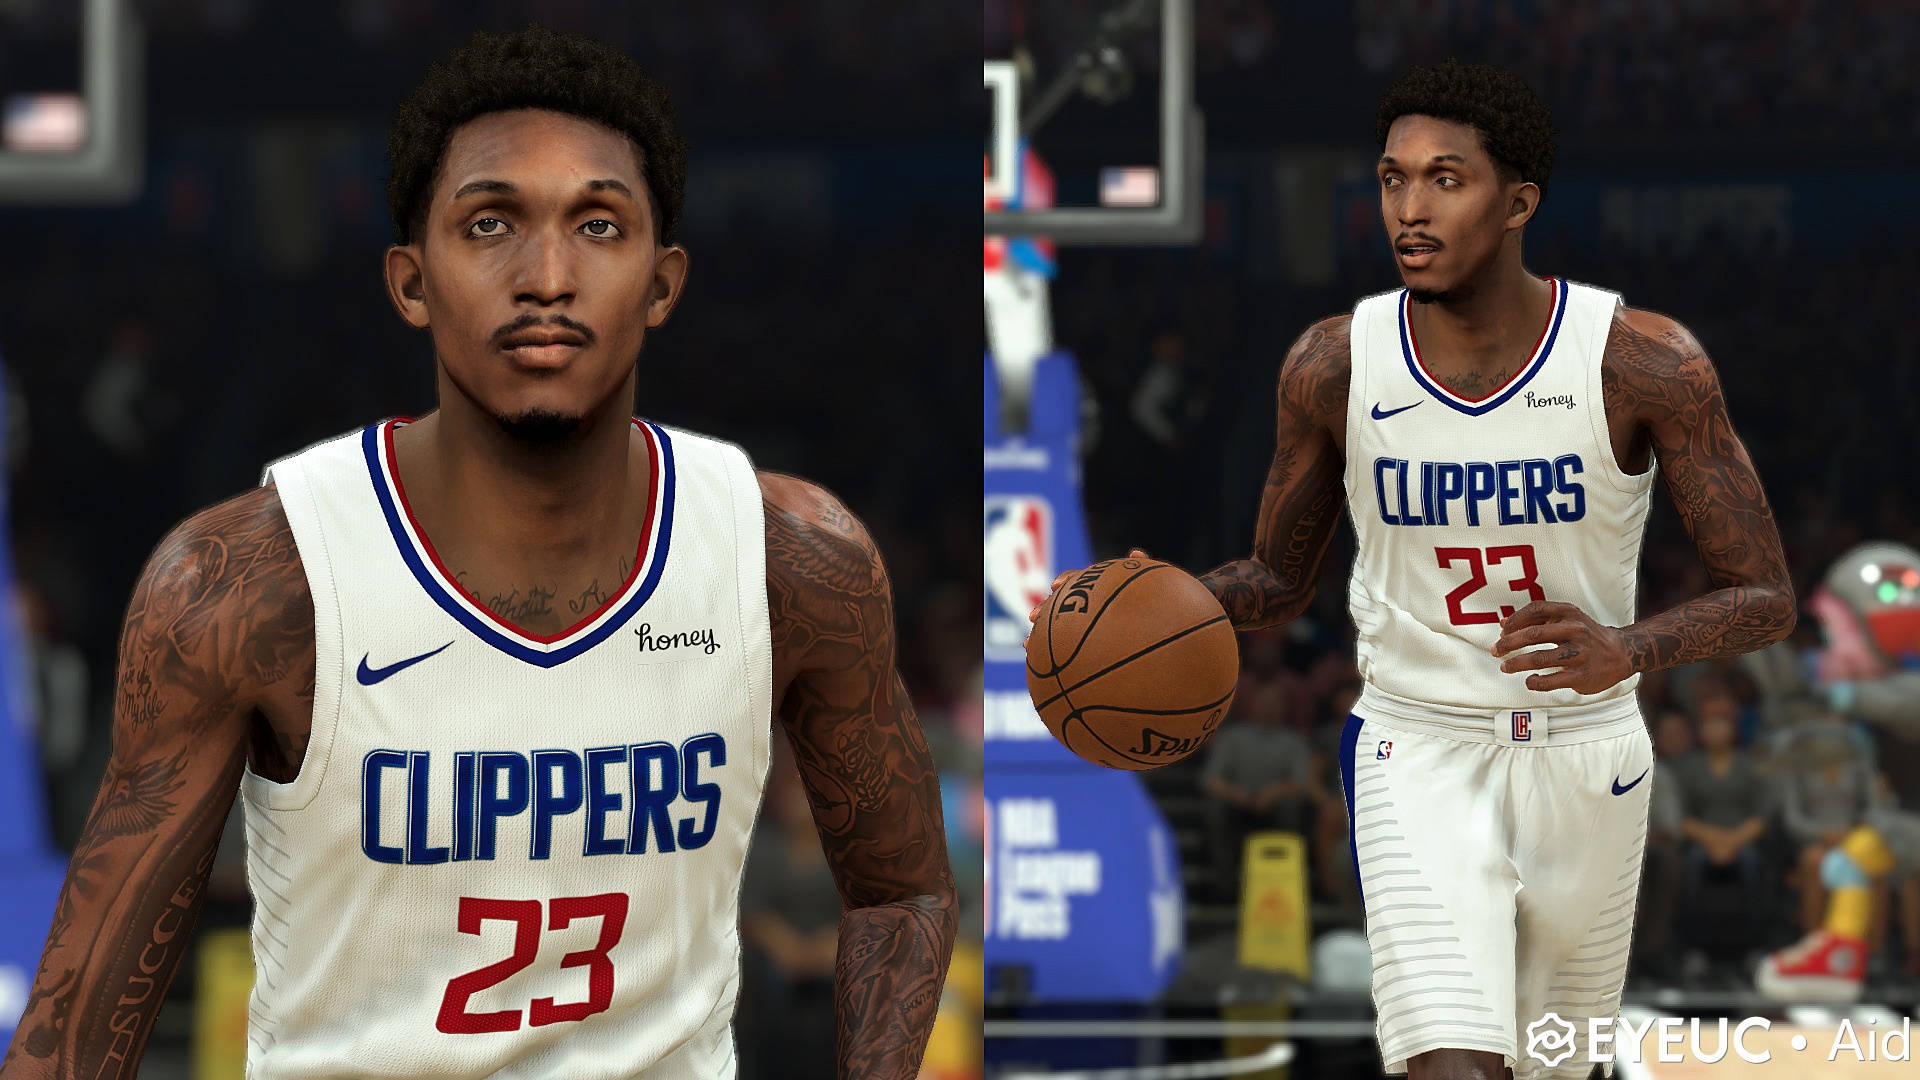 Lou Williams As A 2k Player Background